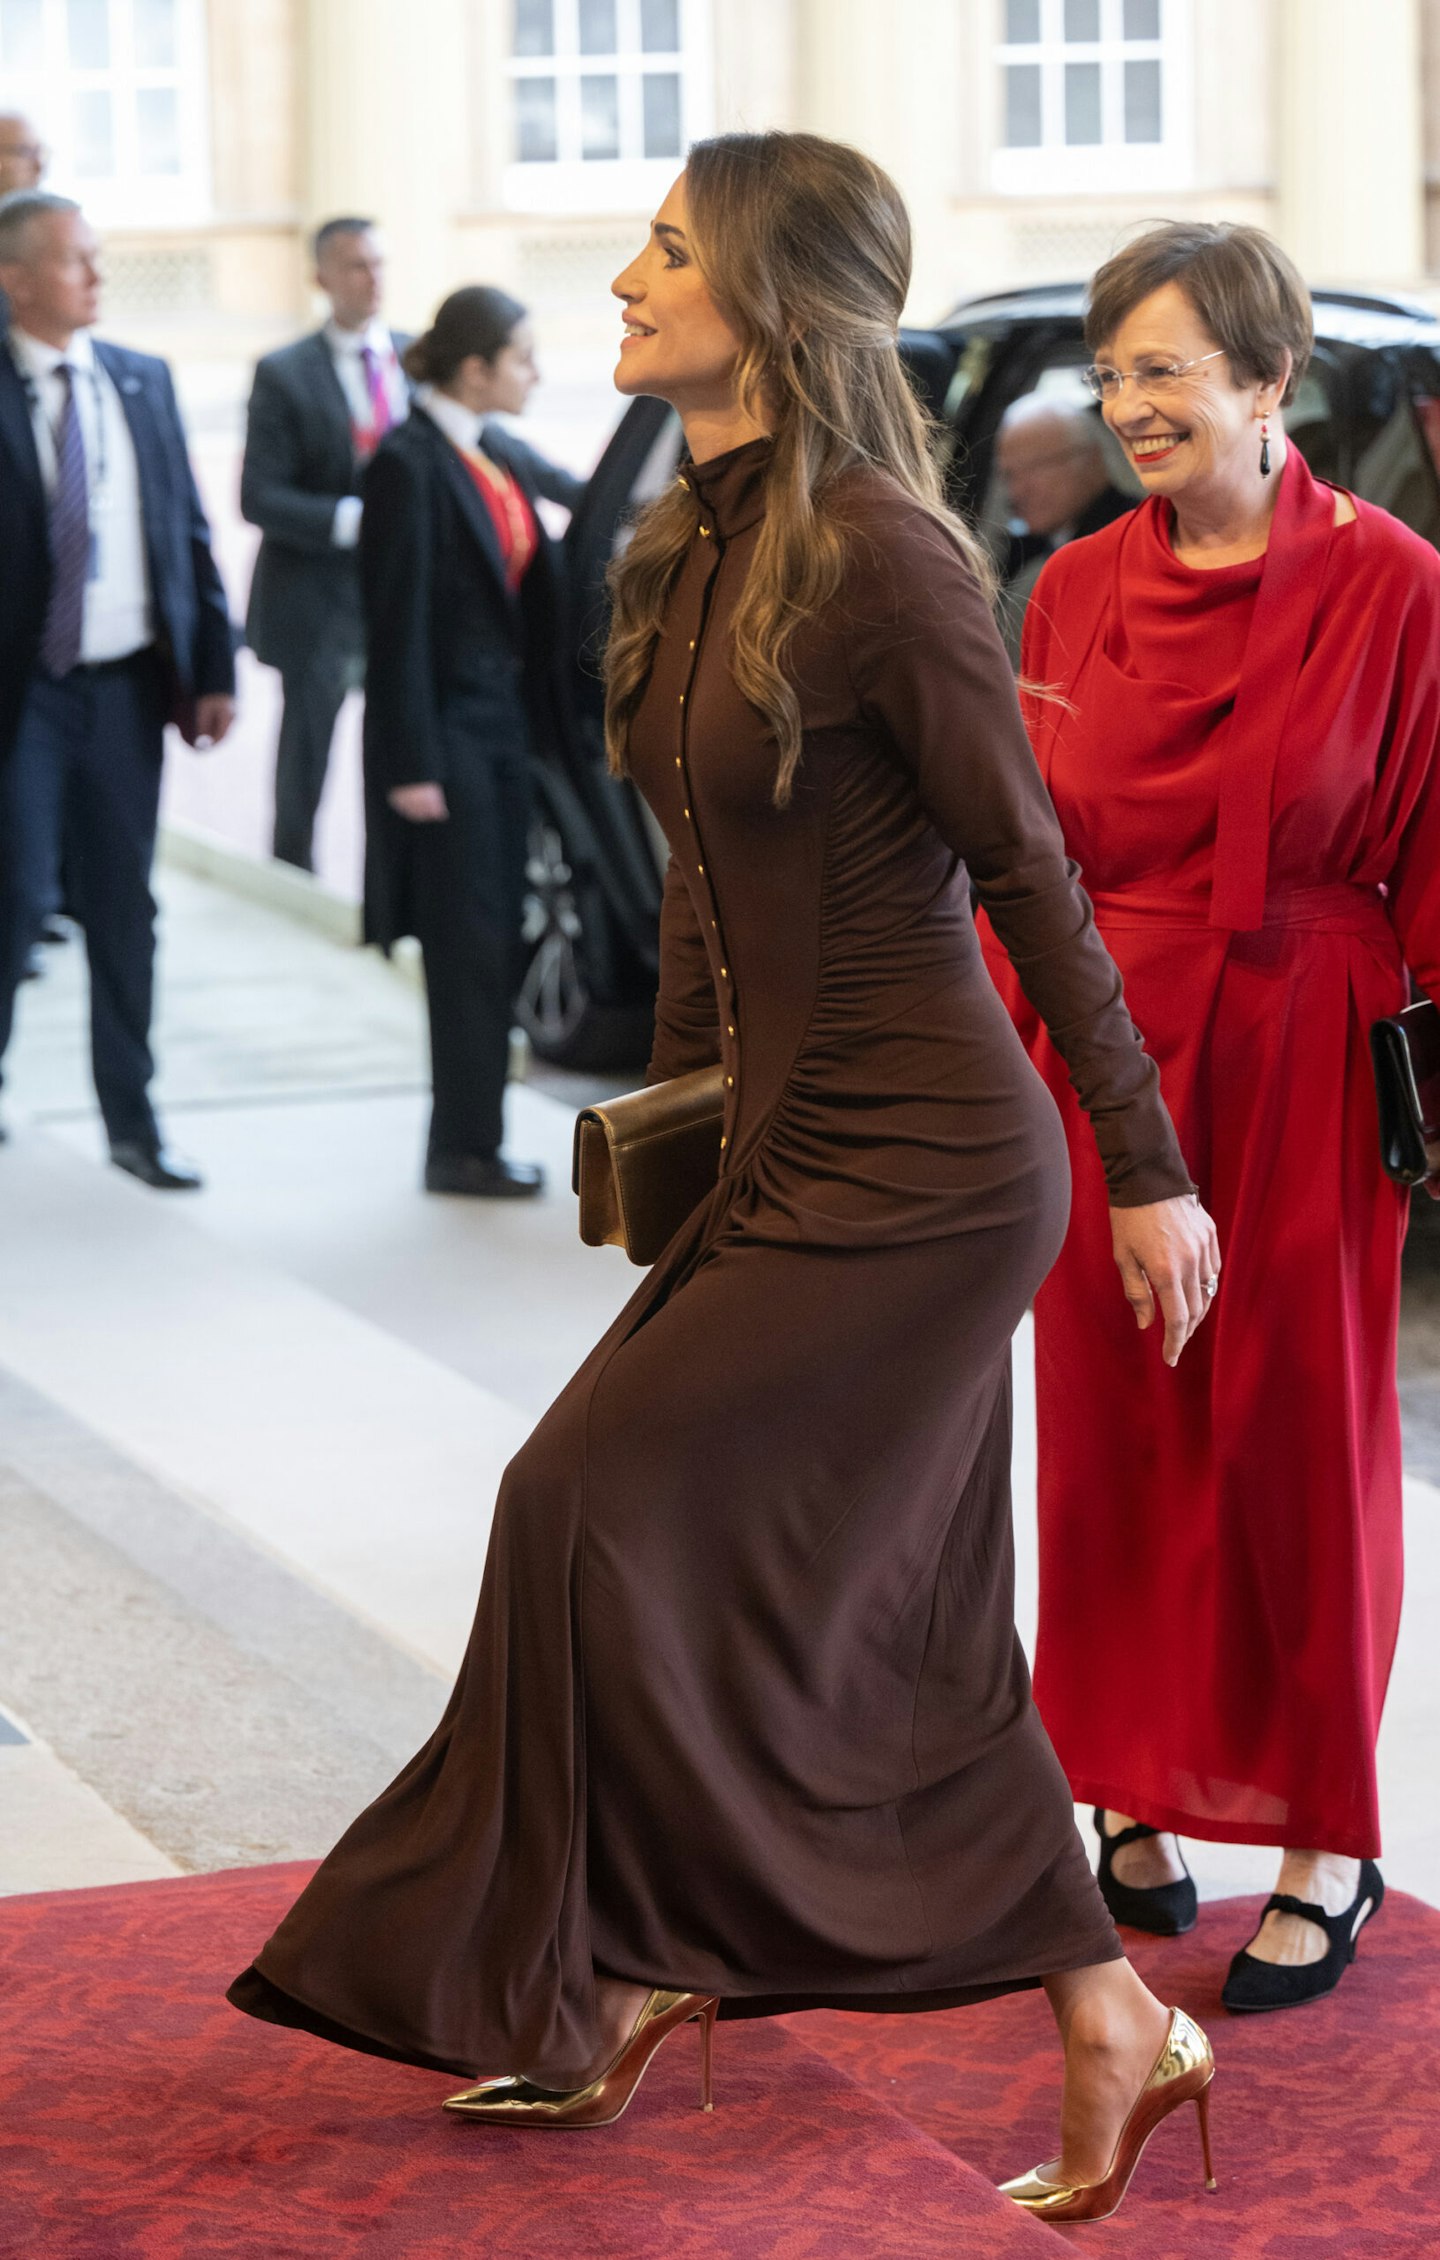 Queen Rania of Jordan attends the Coronation Reception For Overseas Guests at Buckingham Palace.